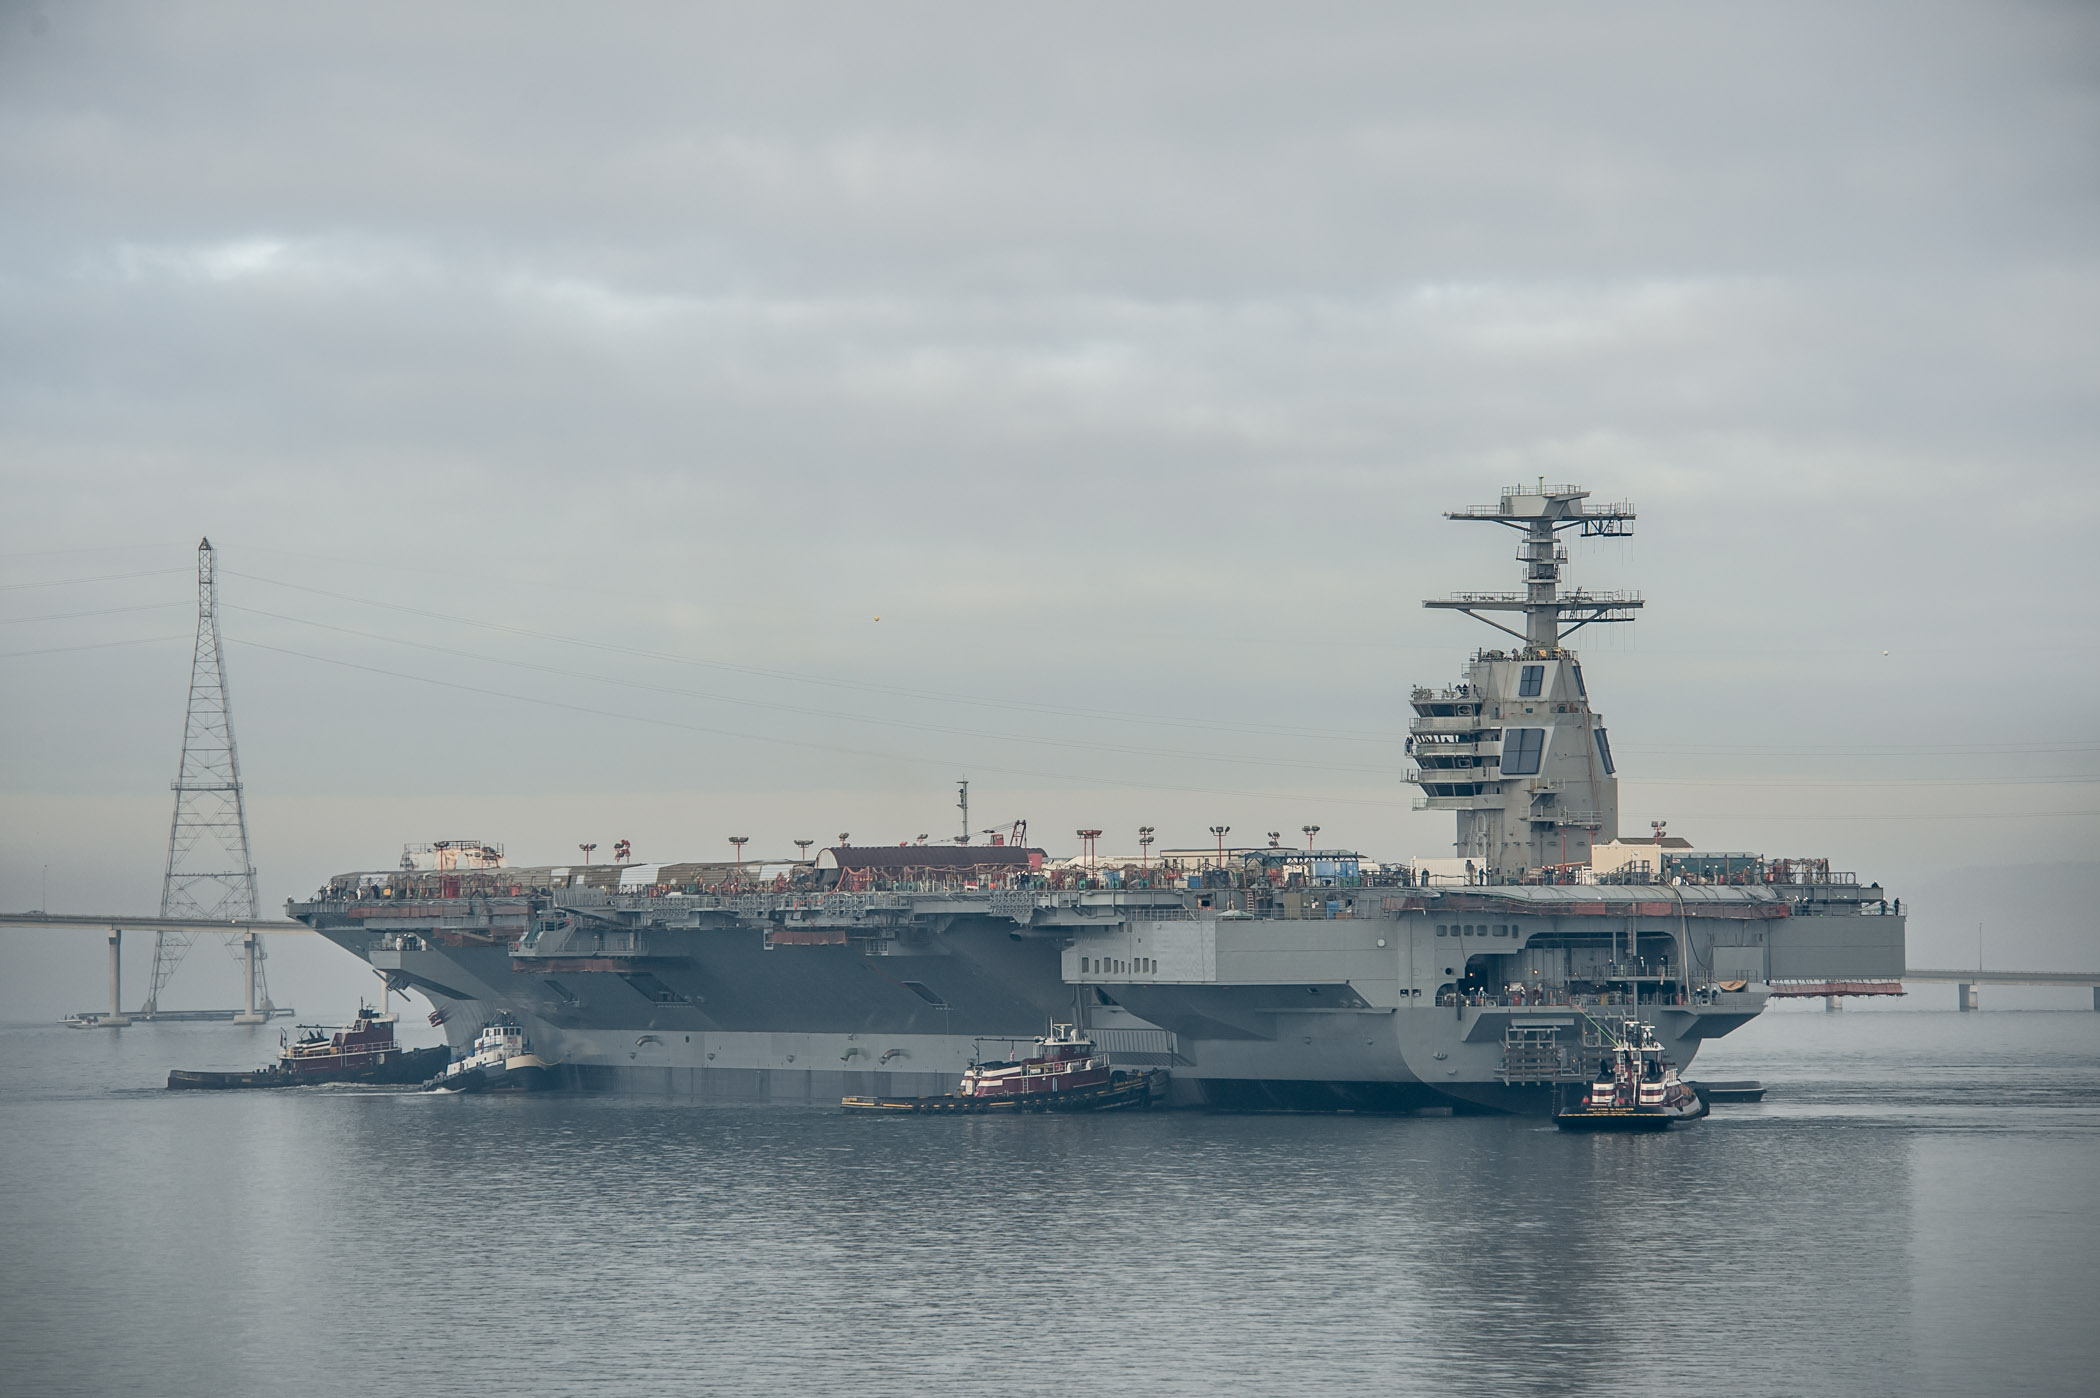 Acquisition Screw-Ups Like Ford Carriers ‘Predictable;’ Congress Isn’t Fixing Them, Says GAO